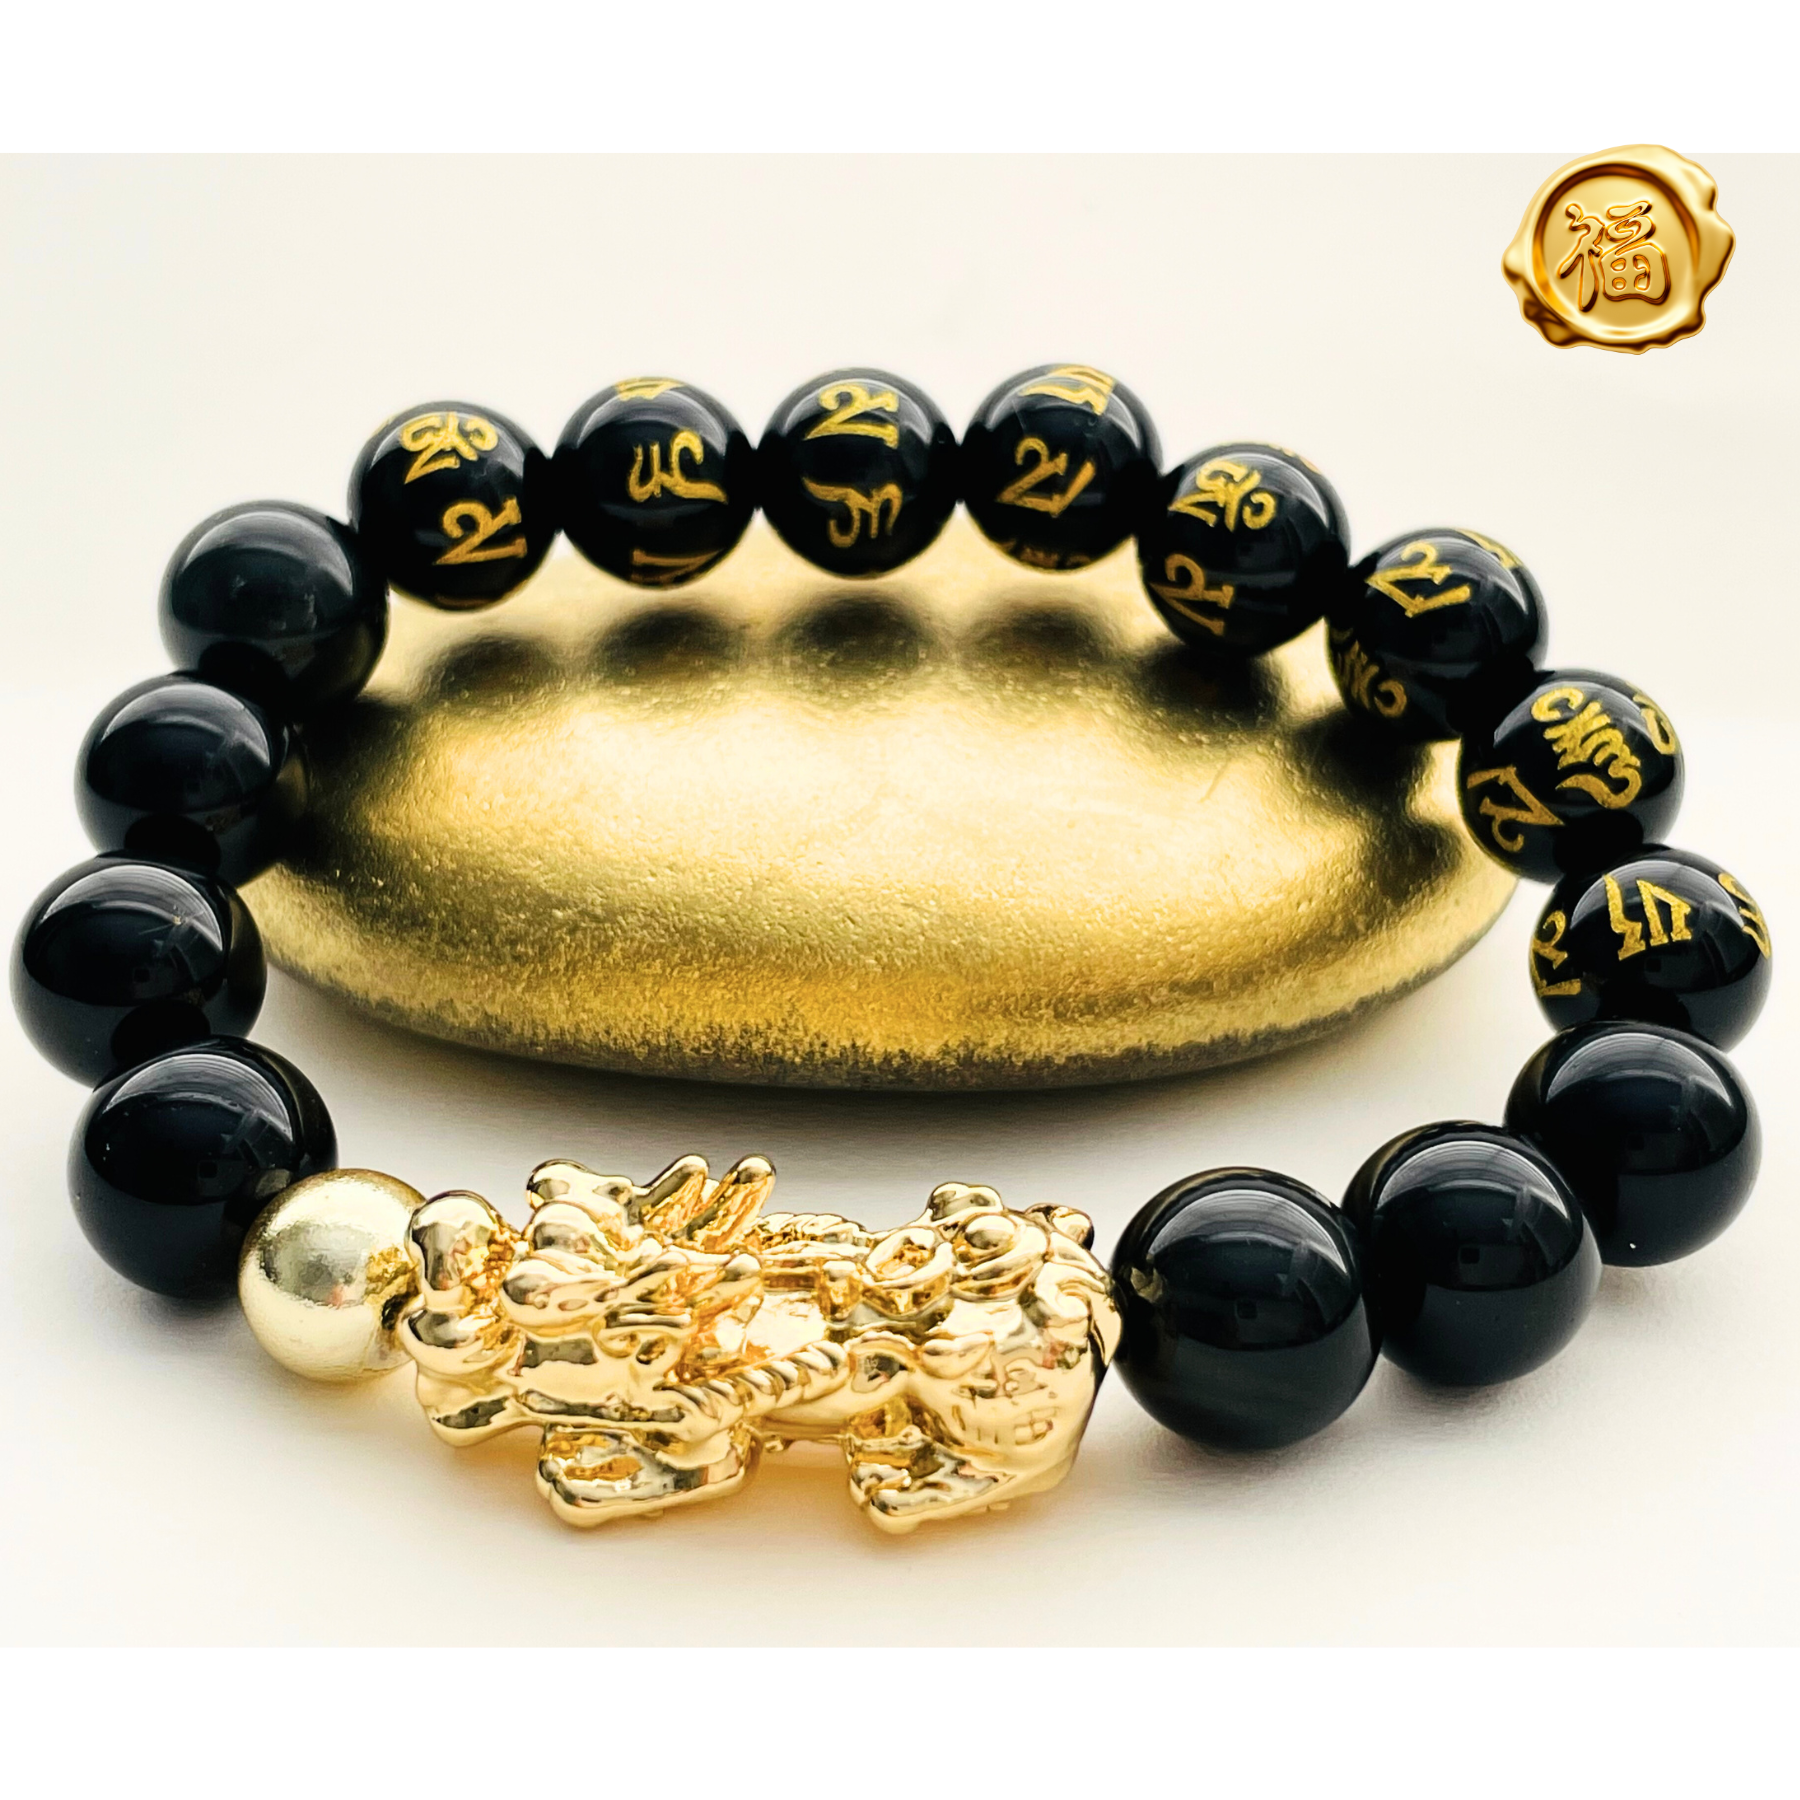 Top 7A Tiger's Eye Natural Stone Chinese Zodiac Charm Bracelet for Good Luck and Fortune for Man